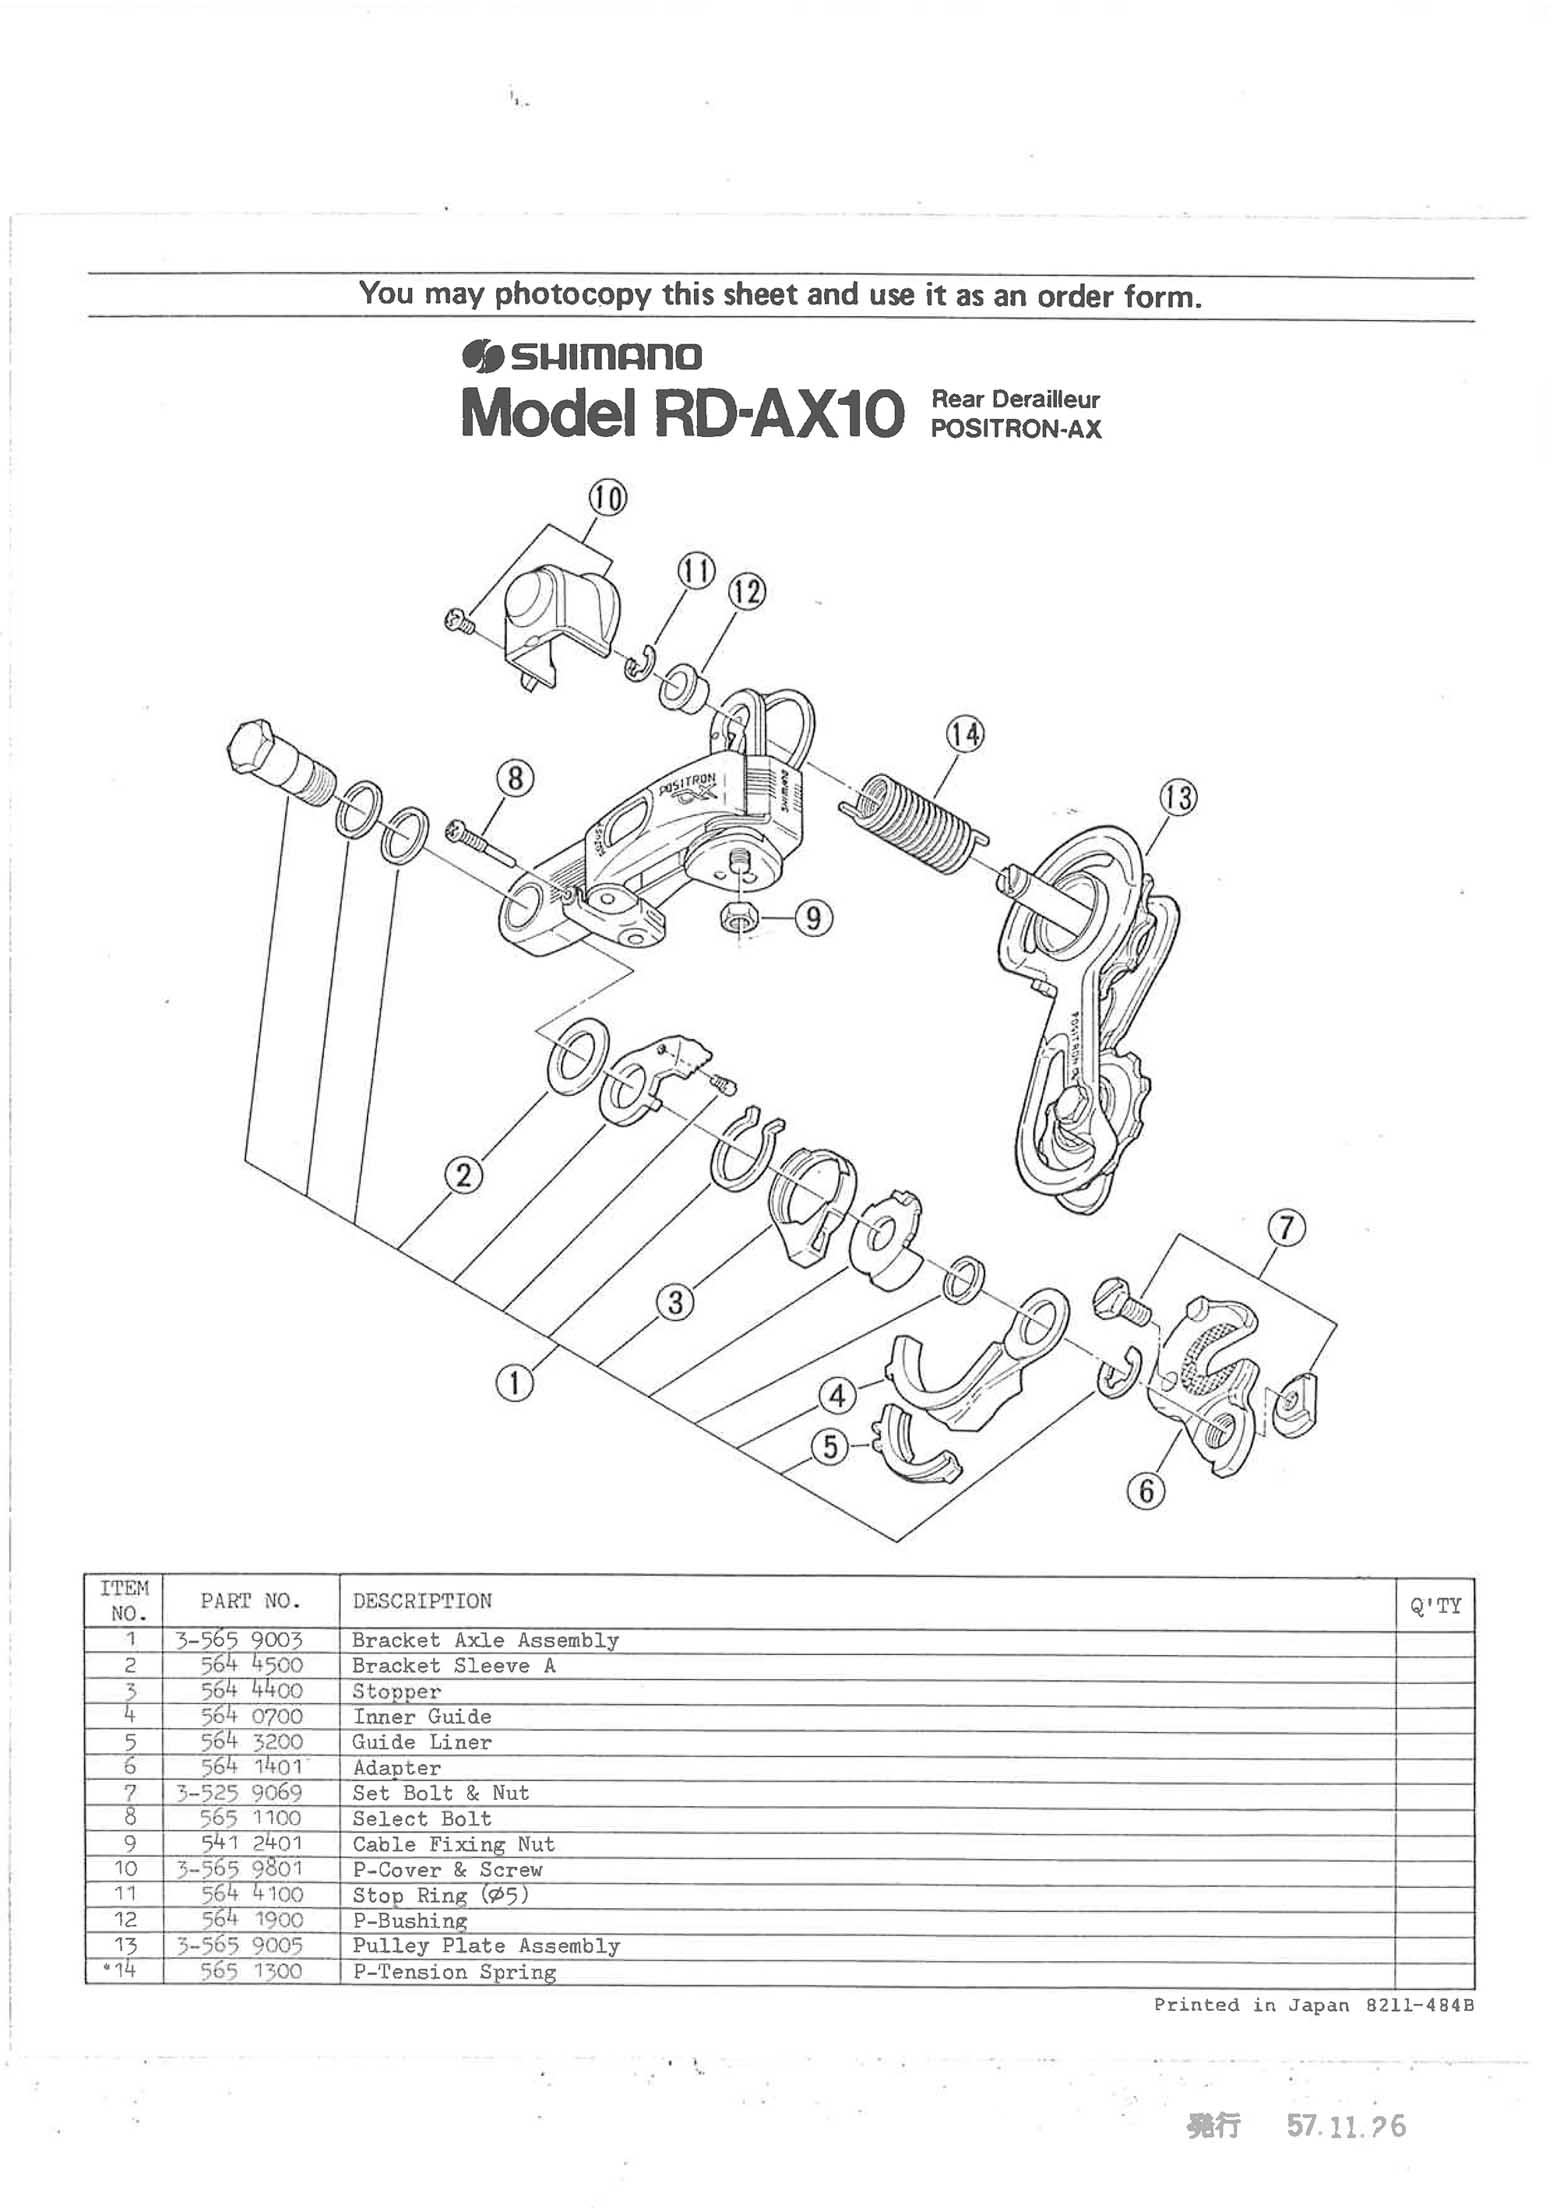 Shimano web site 2020 - exploded views from 1982 Positron AX (AX10) main image